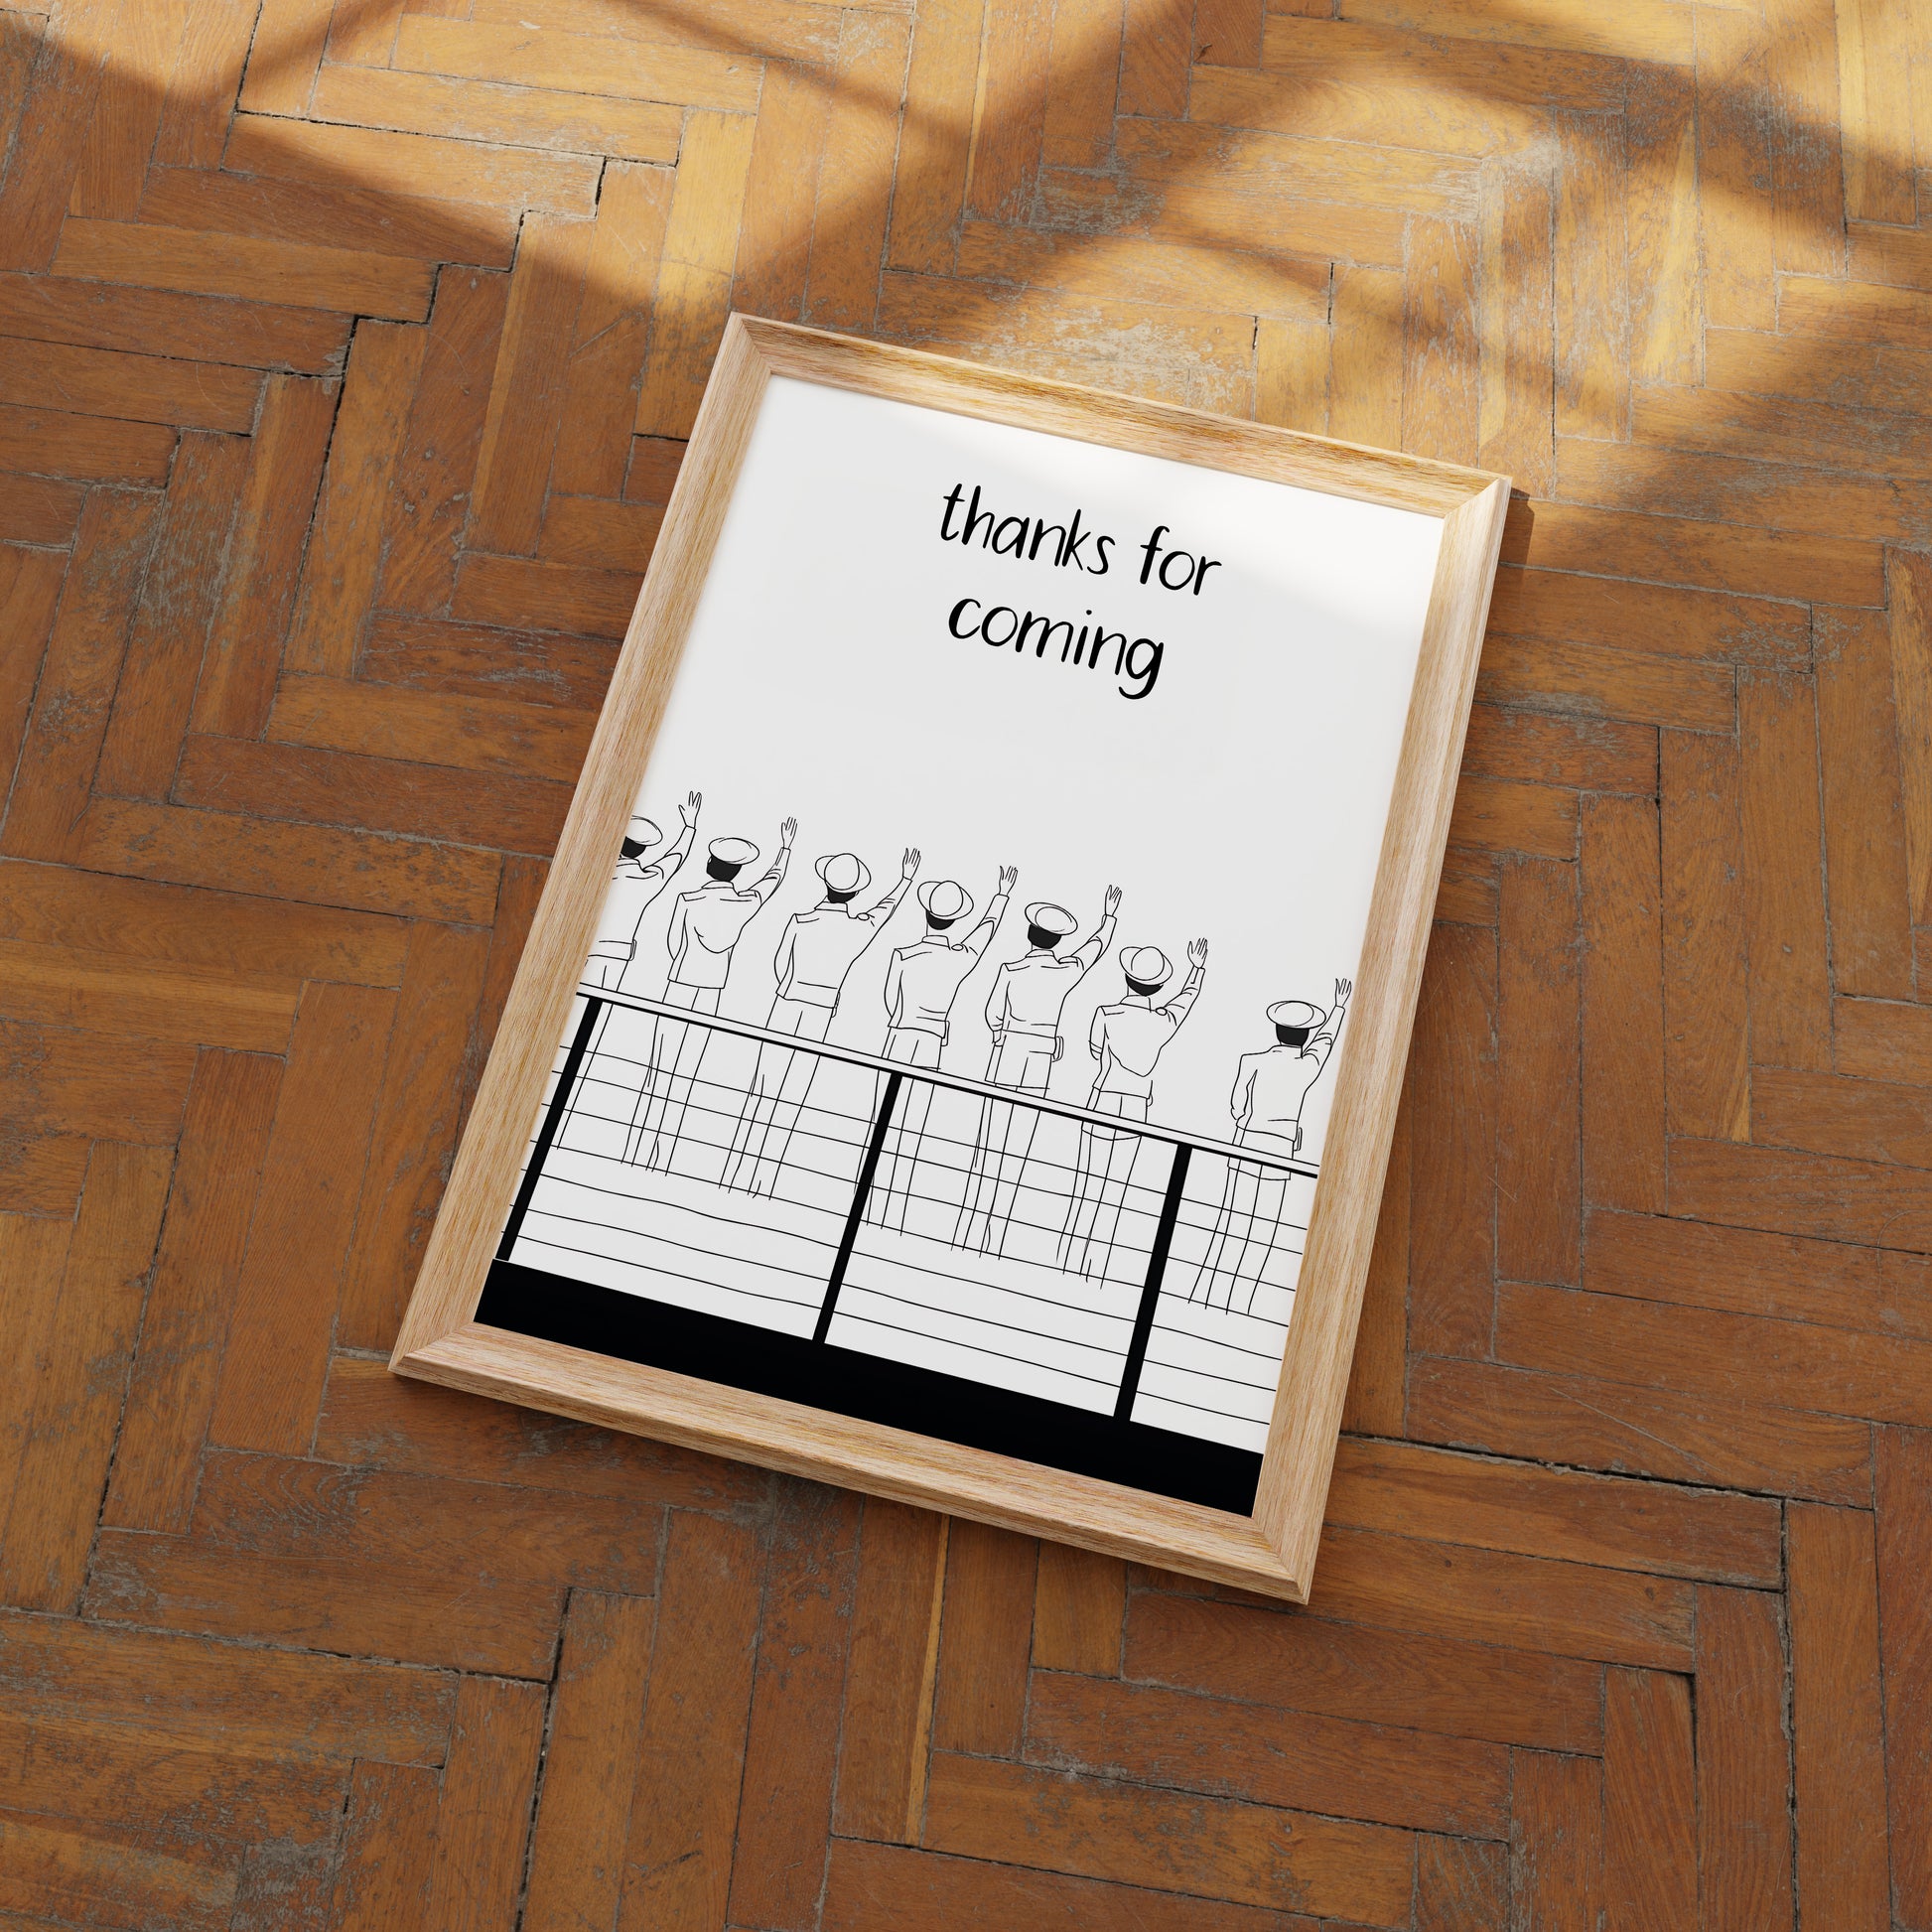 A framed picture on a wooden floor with a drawing of people waving goodbye and the text "thanks for coming."